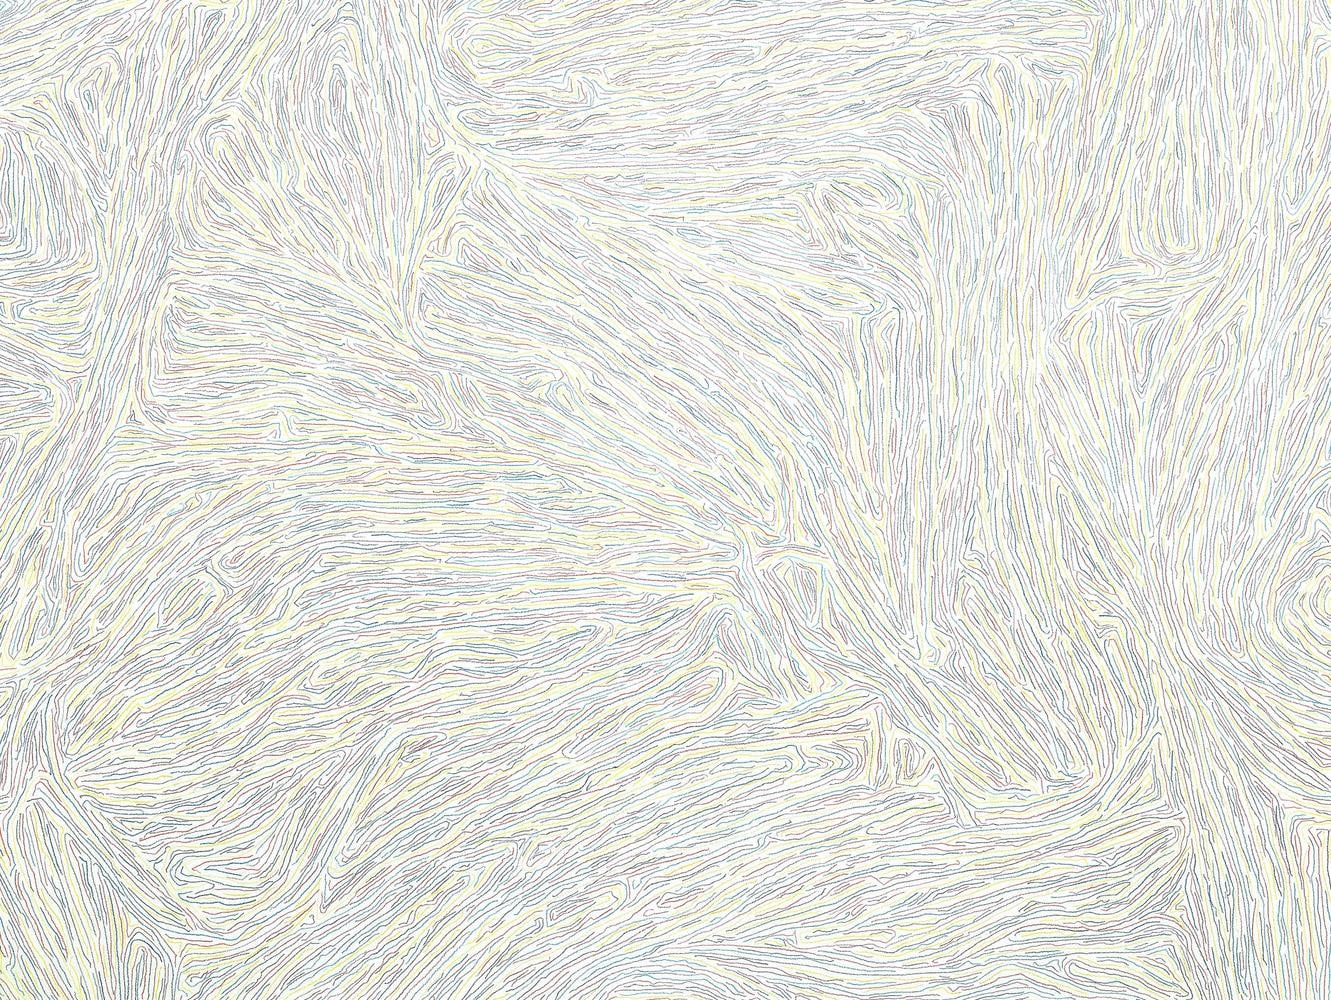 Sol LeWitt
Wall Drawing #69 (detail)
1971
colored pencil on wall
dimensions variable